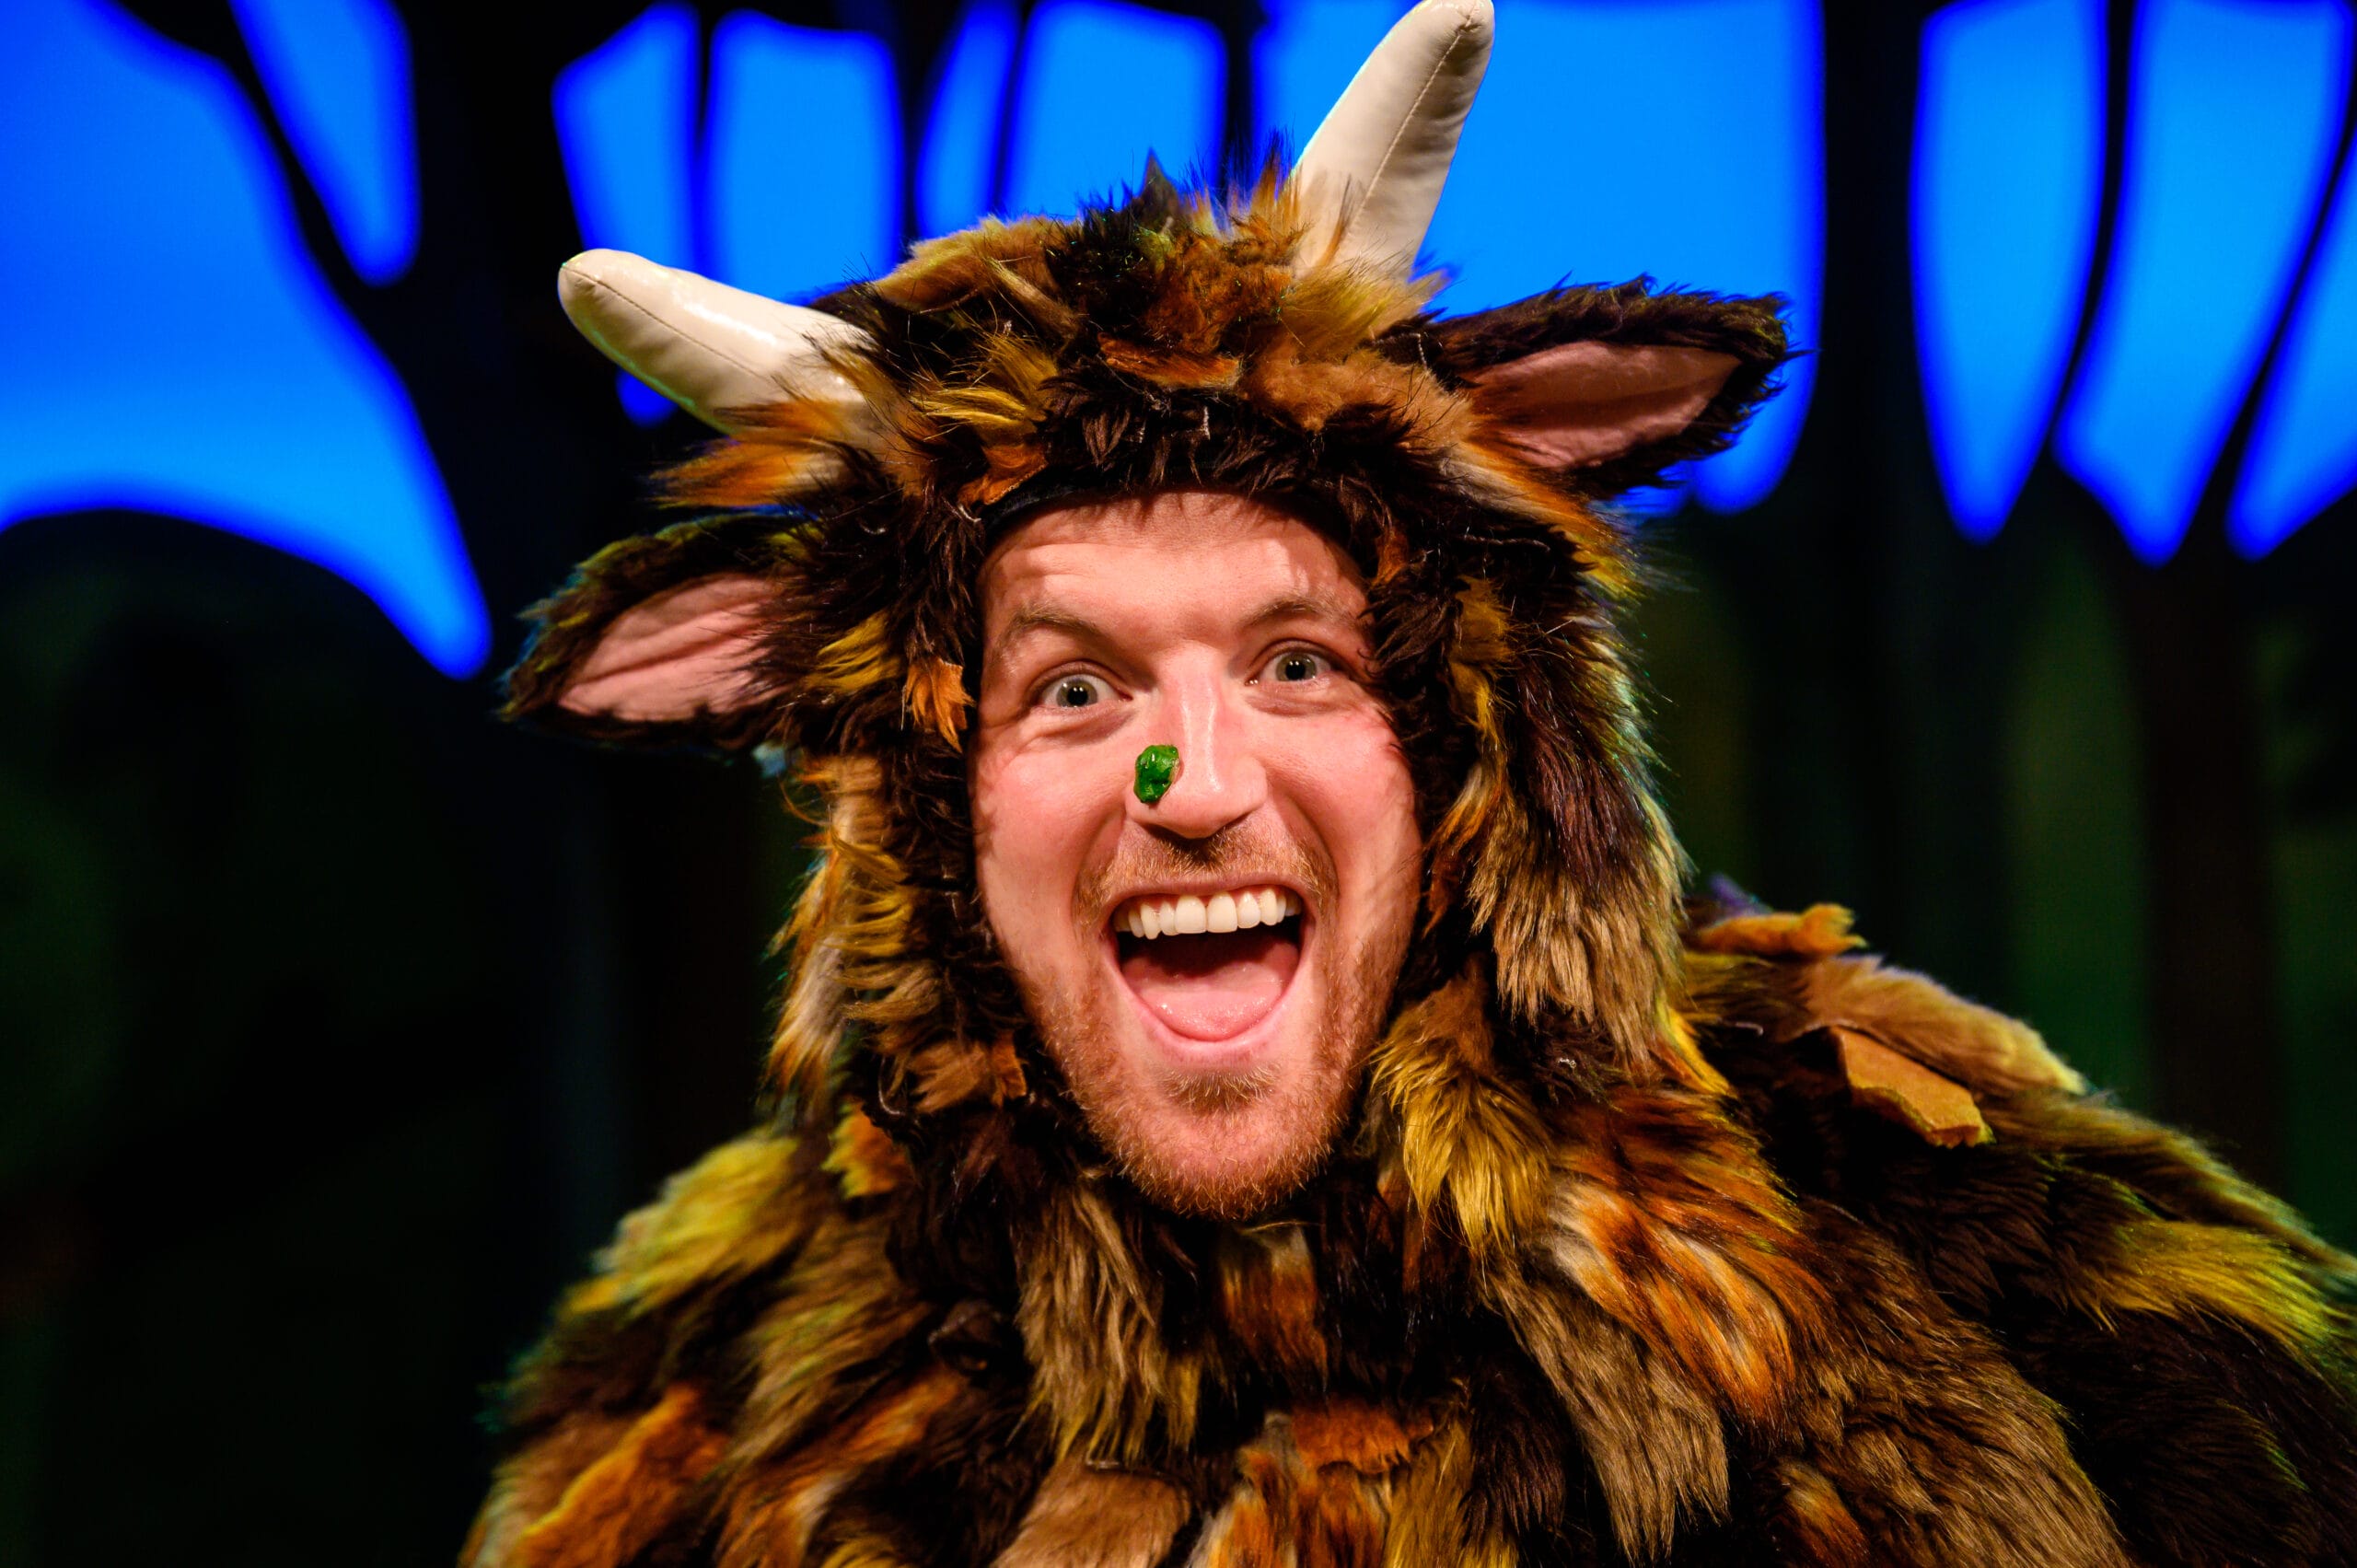 The Gruffalo actor wears a large fluffy costume with textured brown and amber fur, pink ears and large horns. He has an exaggerated green wart on his nose and is looking straight at the camera with a wide mouthed, excited expression.